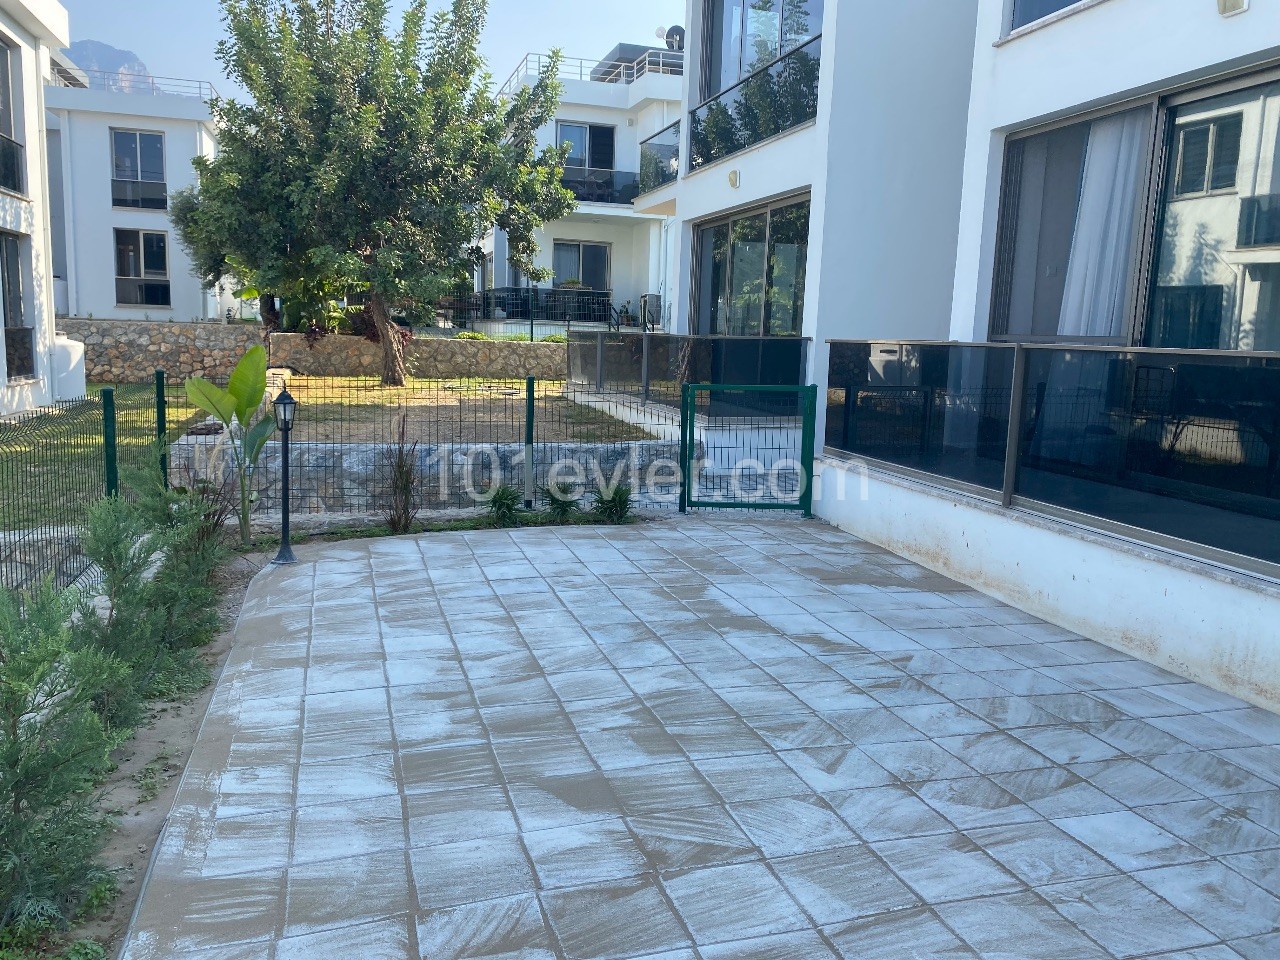 BY THE OWNER, 2+1 SPACIOUS GARDEN FLOOR FOR SALE IN ÇATALKÖY, WITH RENTAL OF 700 GBP ** 